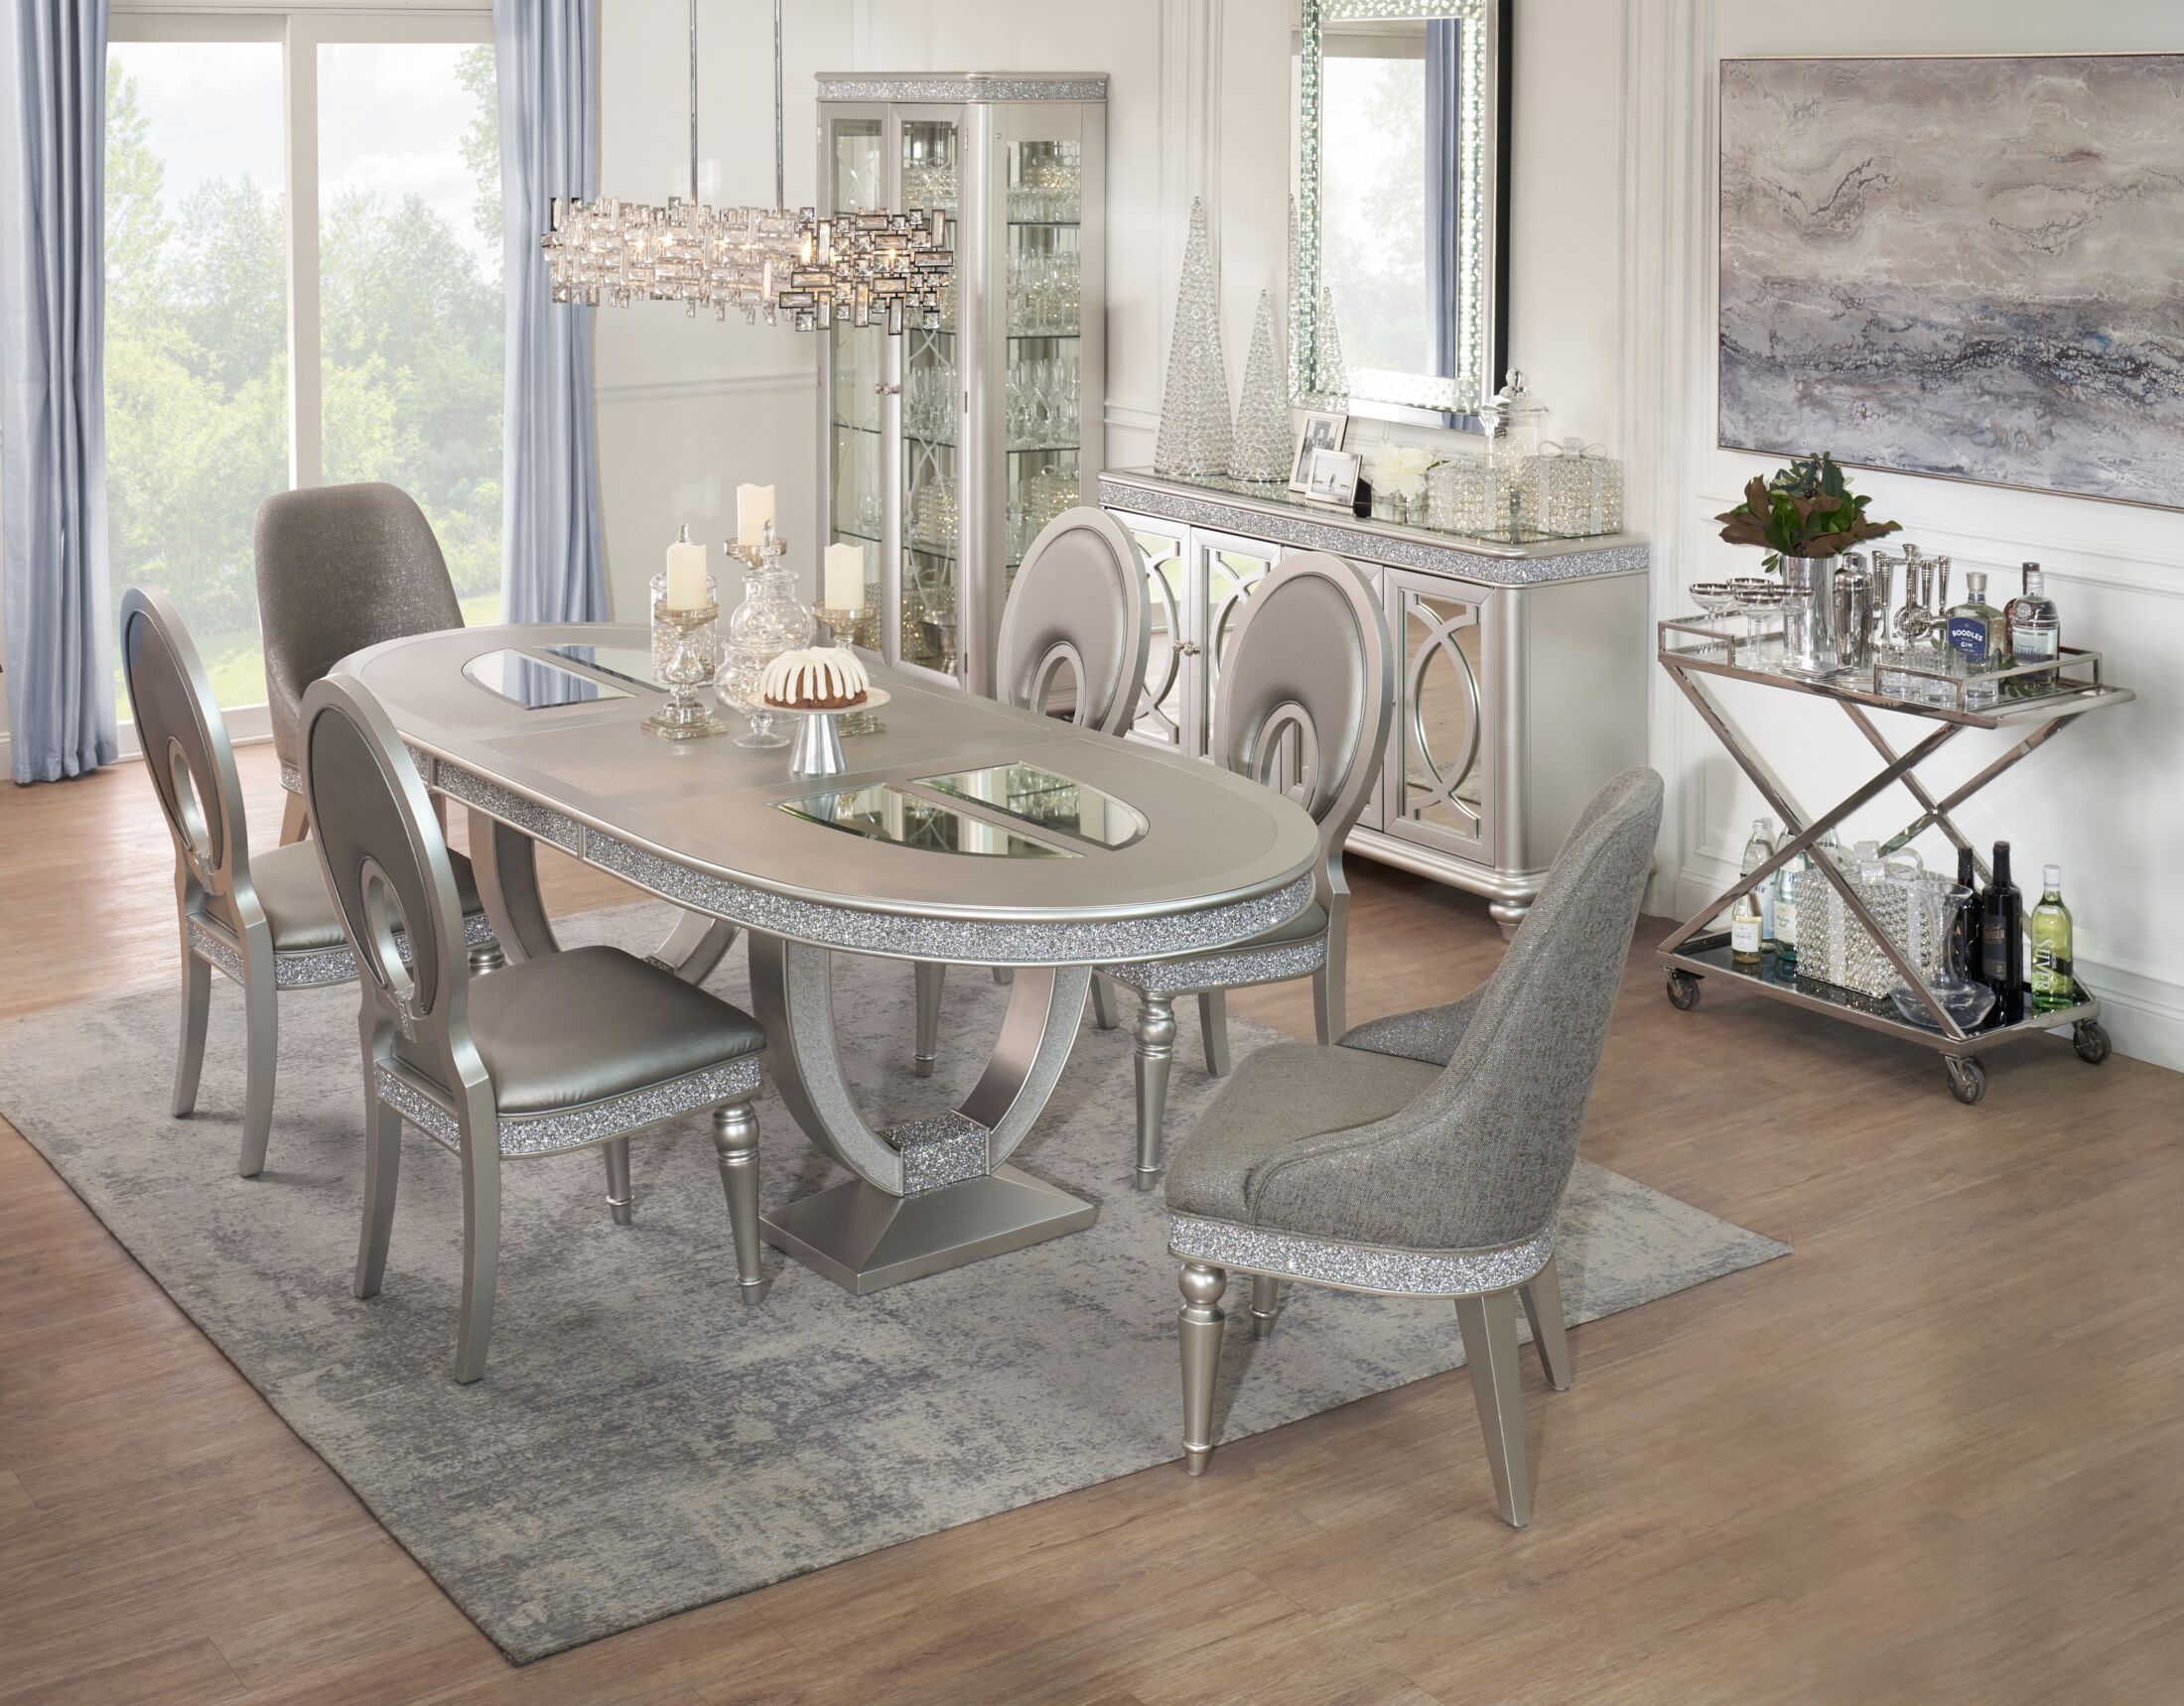 Posh Dining Table 4 Chairs And, Value City Dining Room Tables